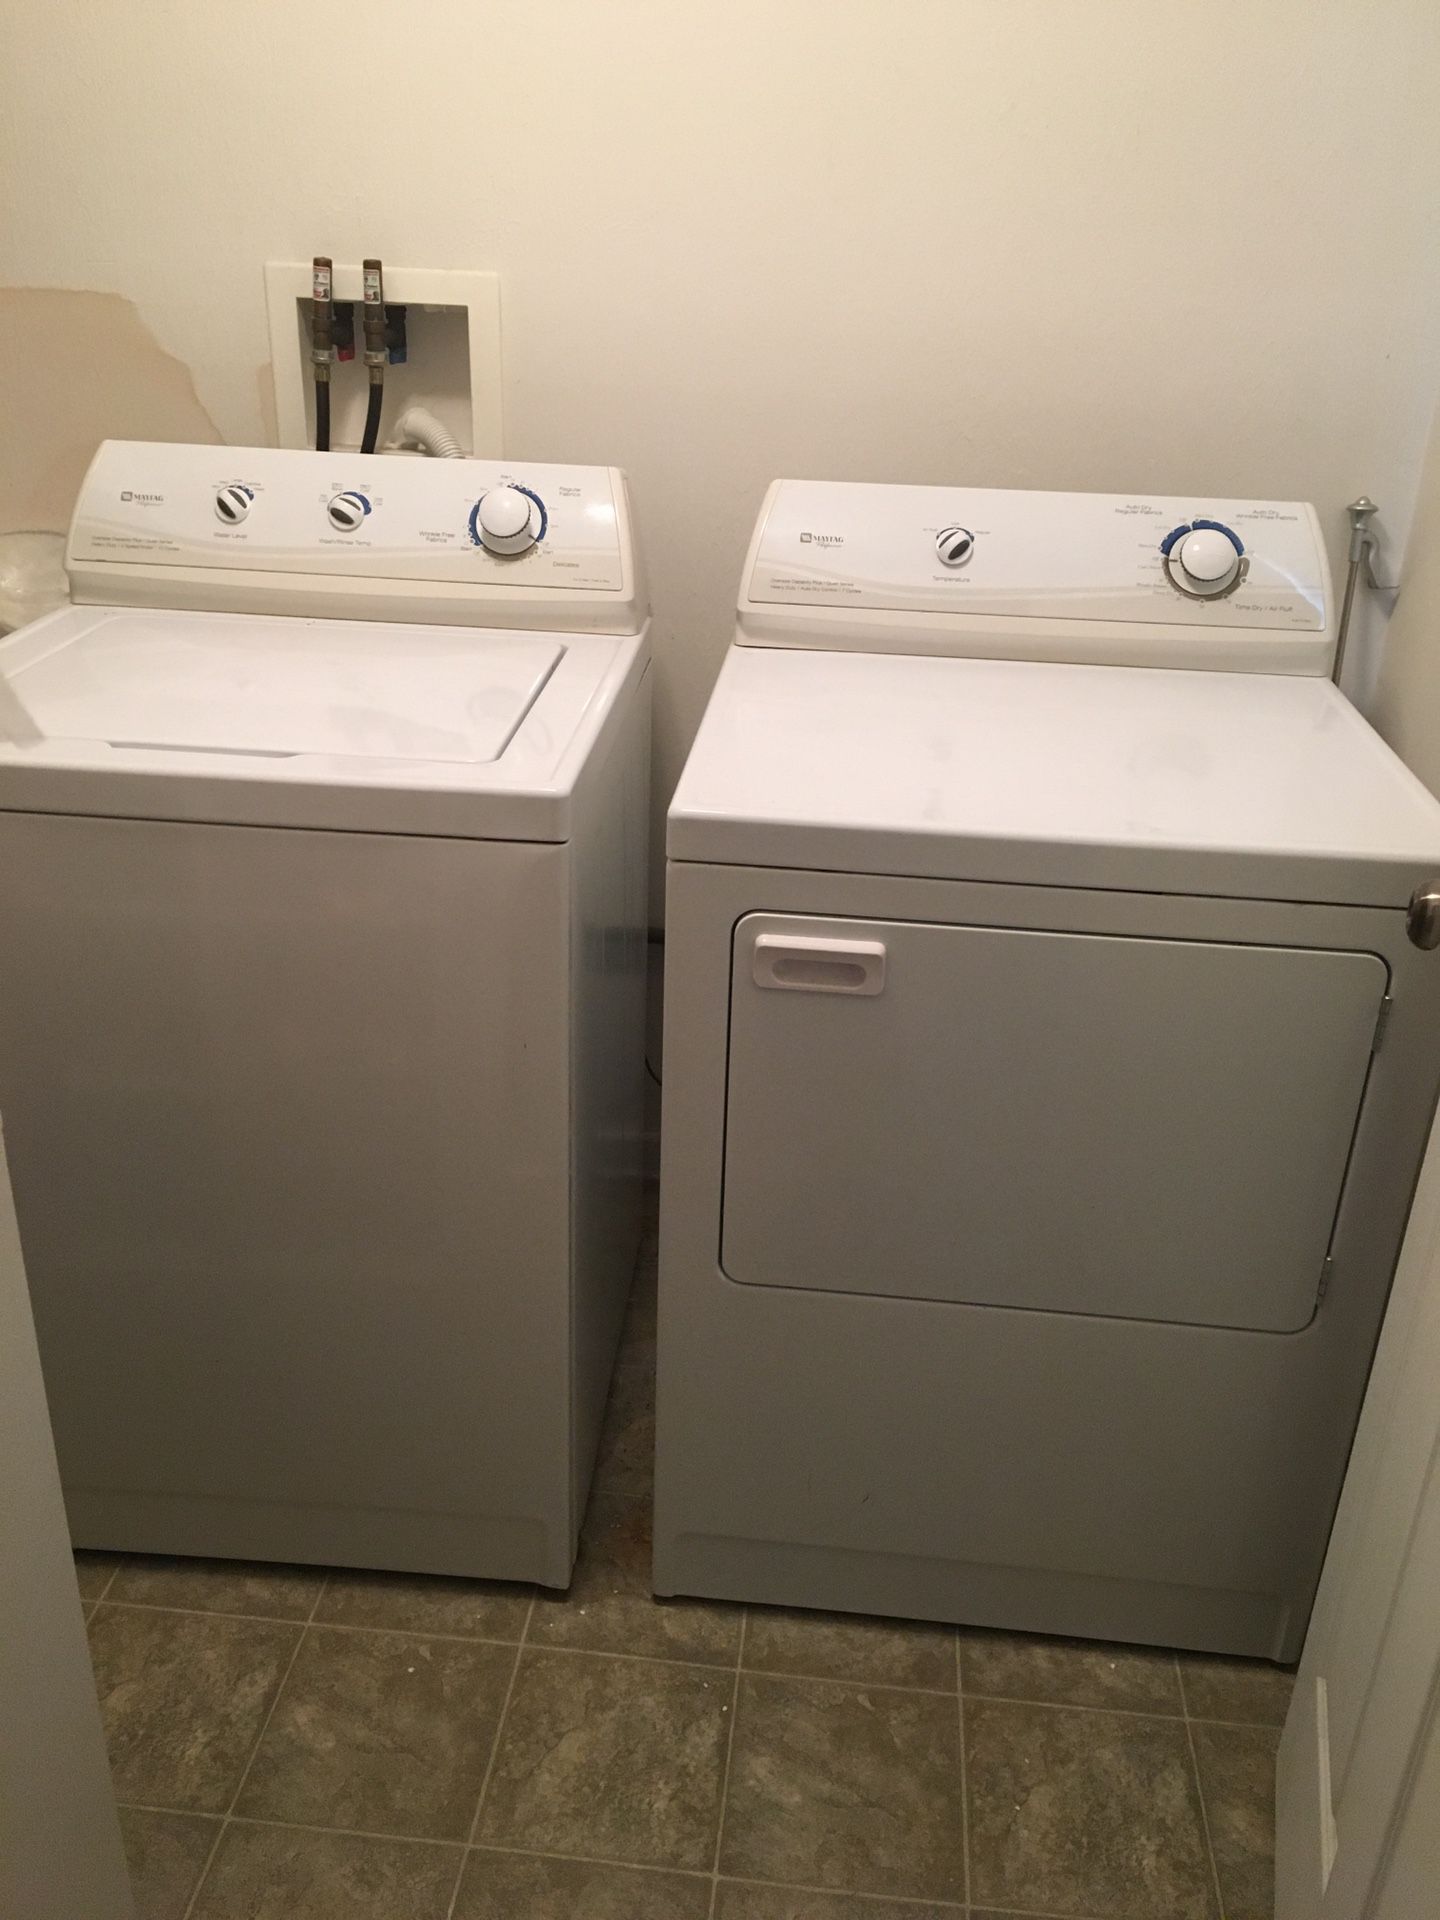 Maytag washer and dryer ( oversize capacity plus, quiet series)